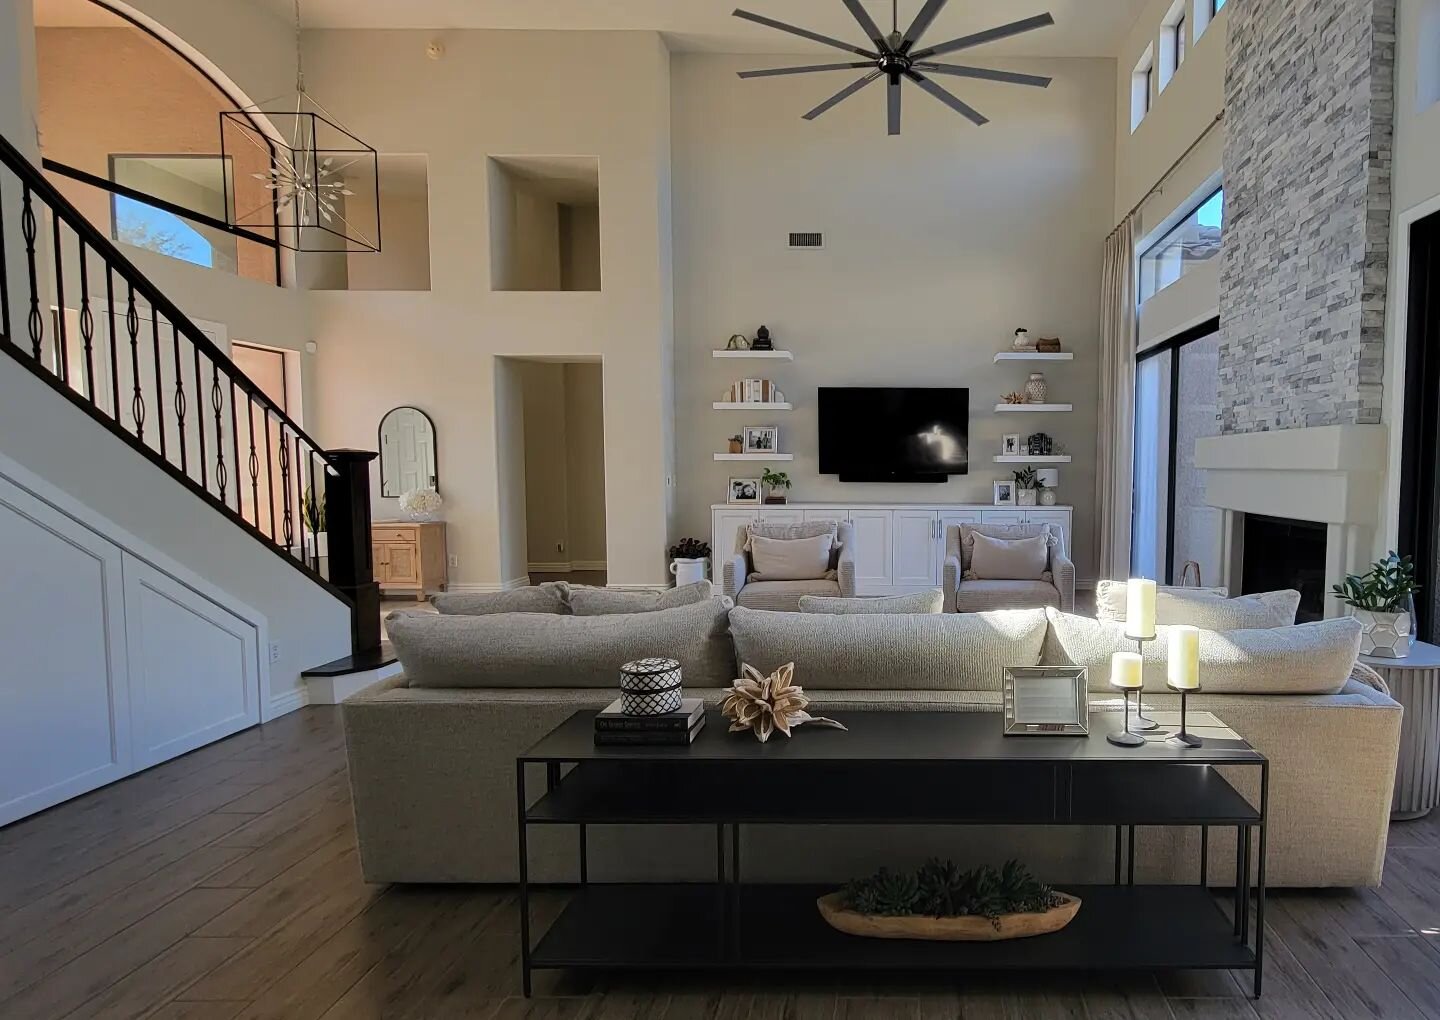 We have a few pieces to add before we're done, but this living room in this McCormick Ranch project is really coming together! The entertainment center is all new, as well as the paneling under the stairs that hides storage. I designed them to custom